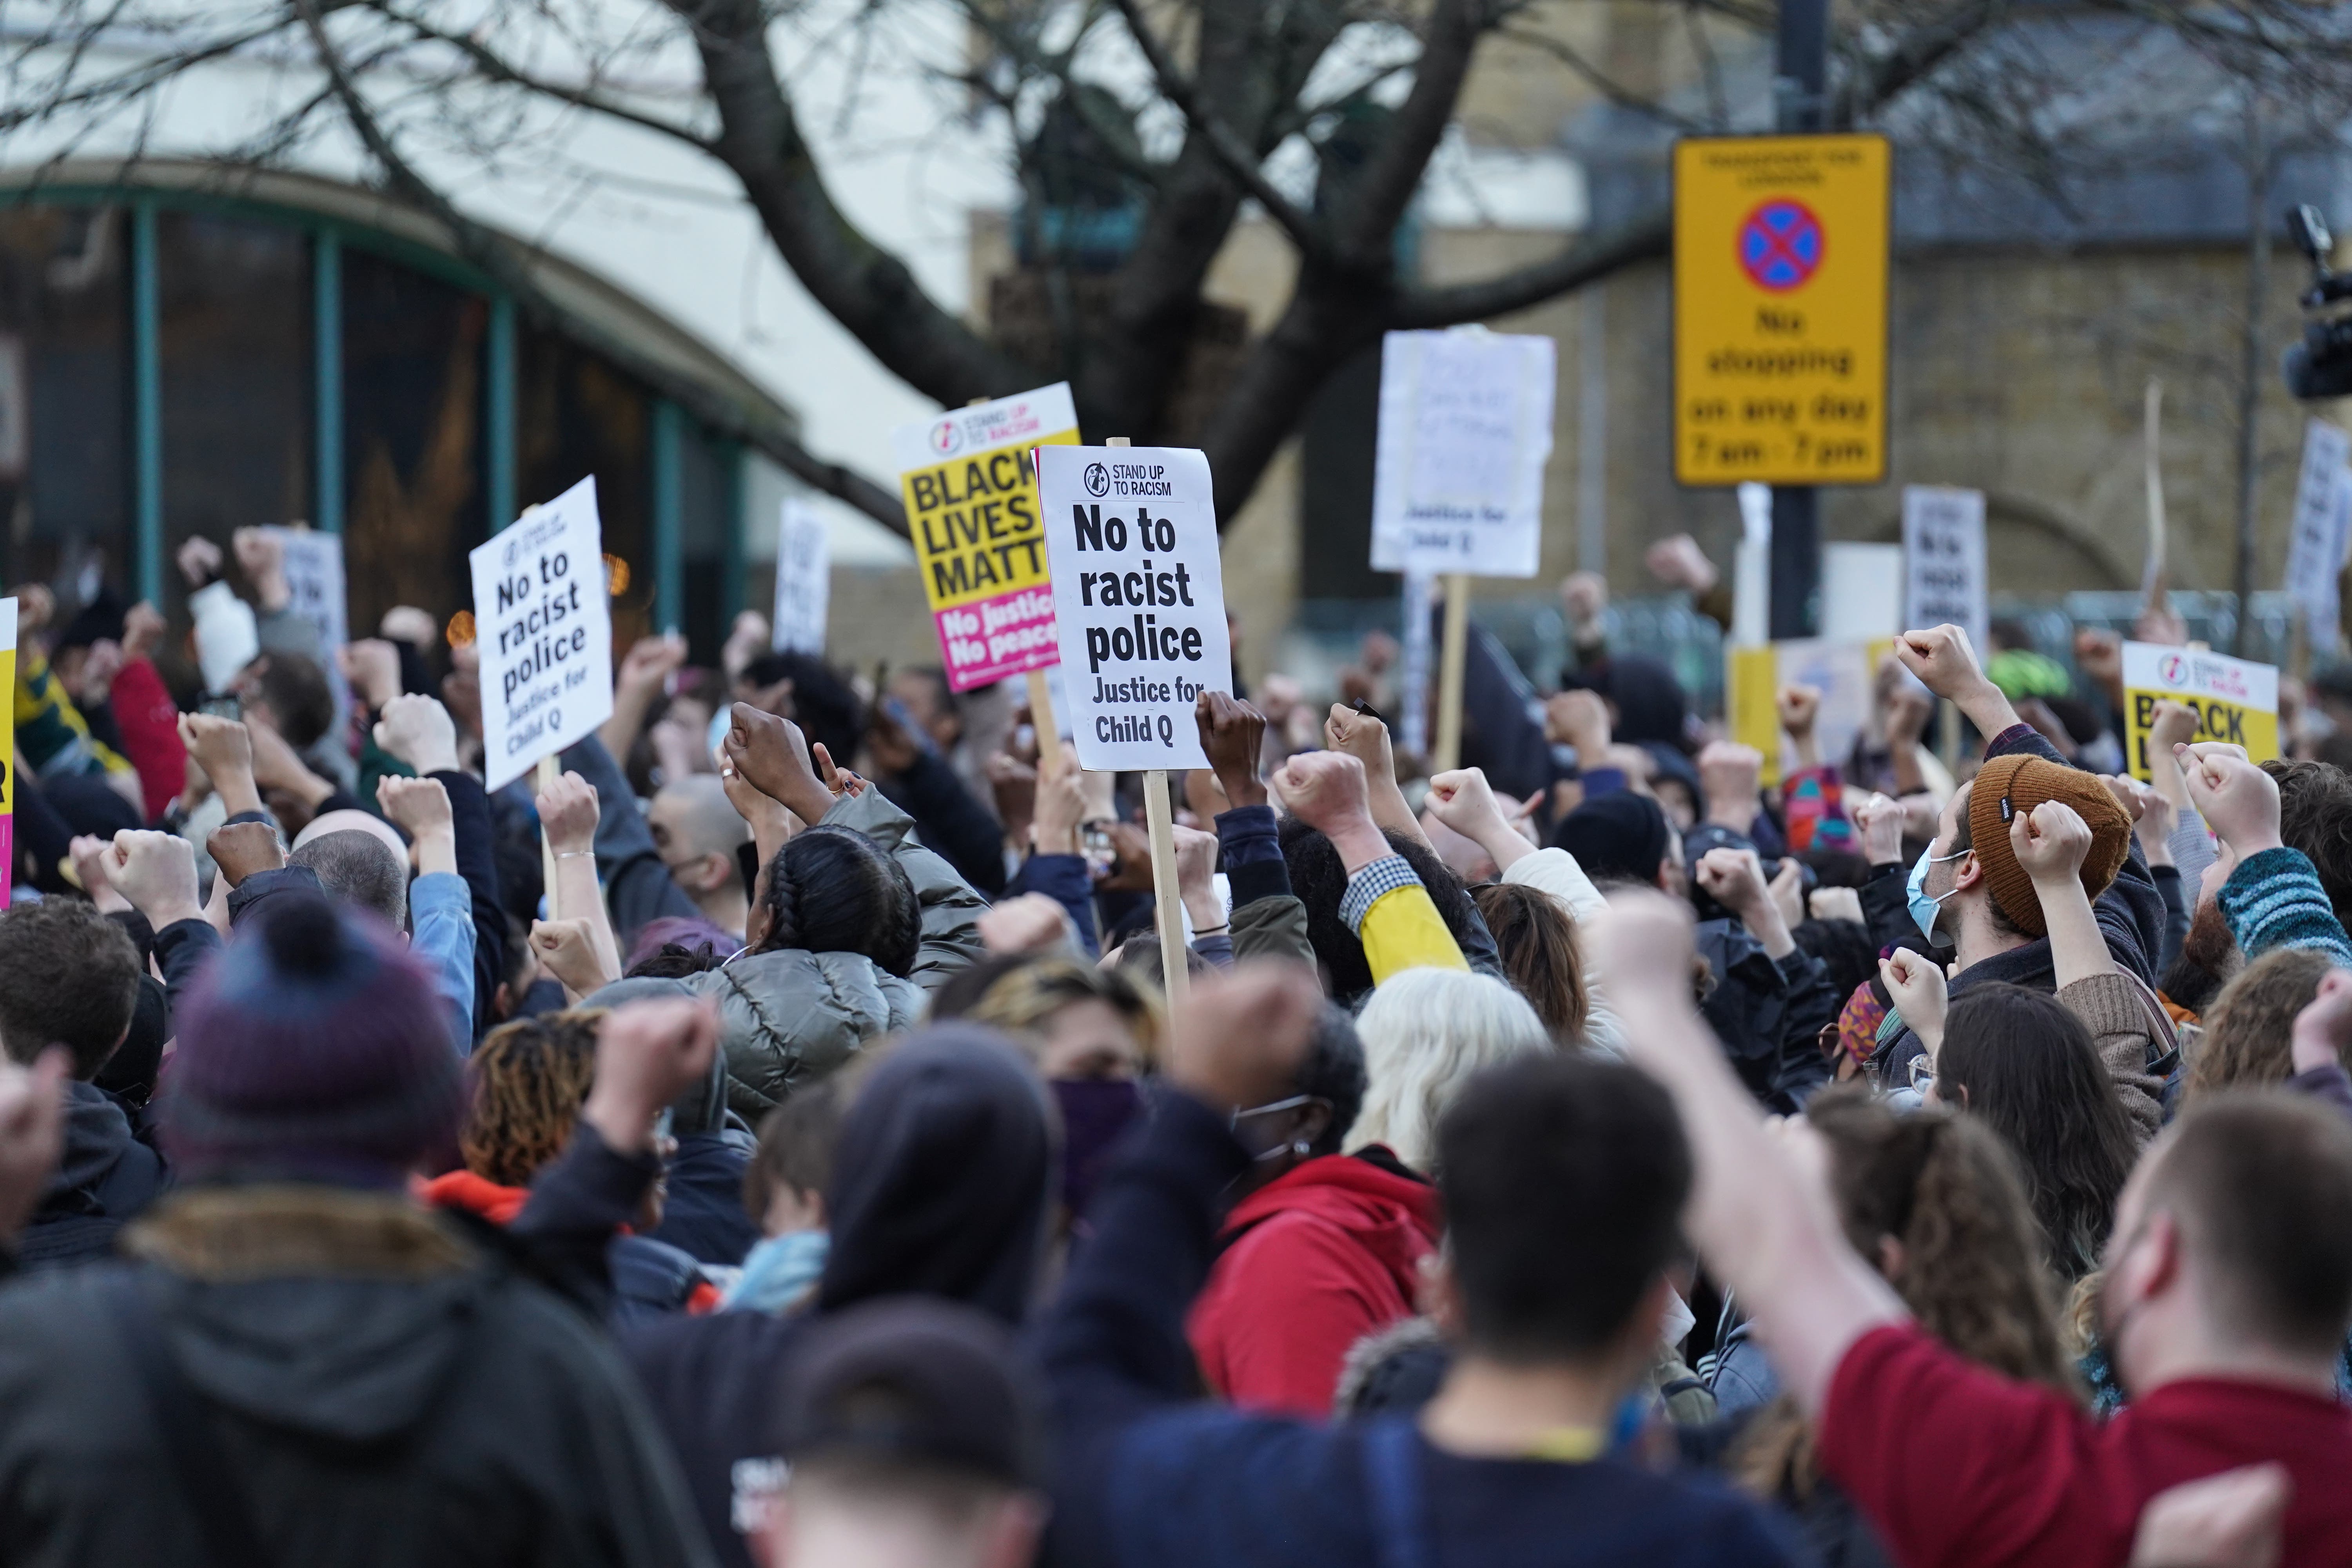 People demonstrate outside Stoke Newington Police Station in London over the treatment of a black 15-year-old schoolgirl who was strip-searched by police while on her period (Stefan Rousseau/PA)